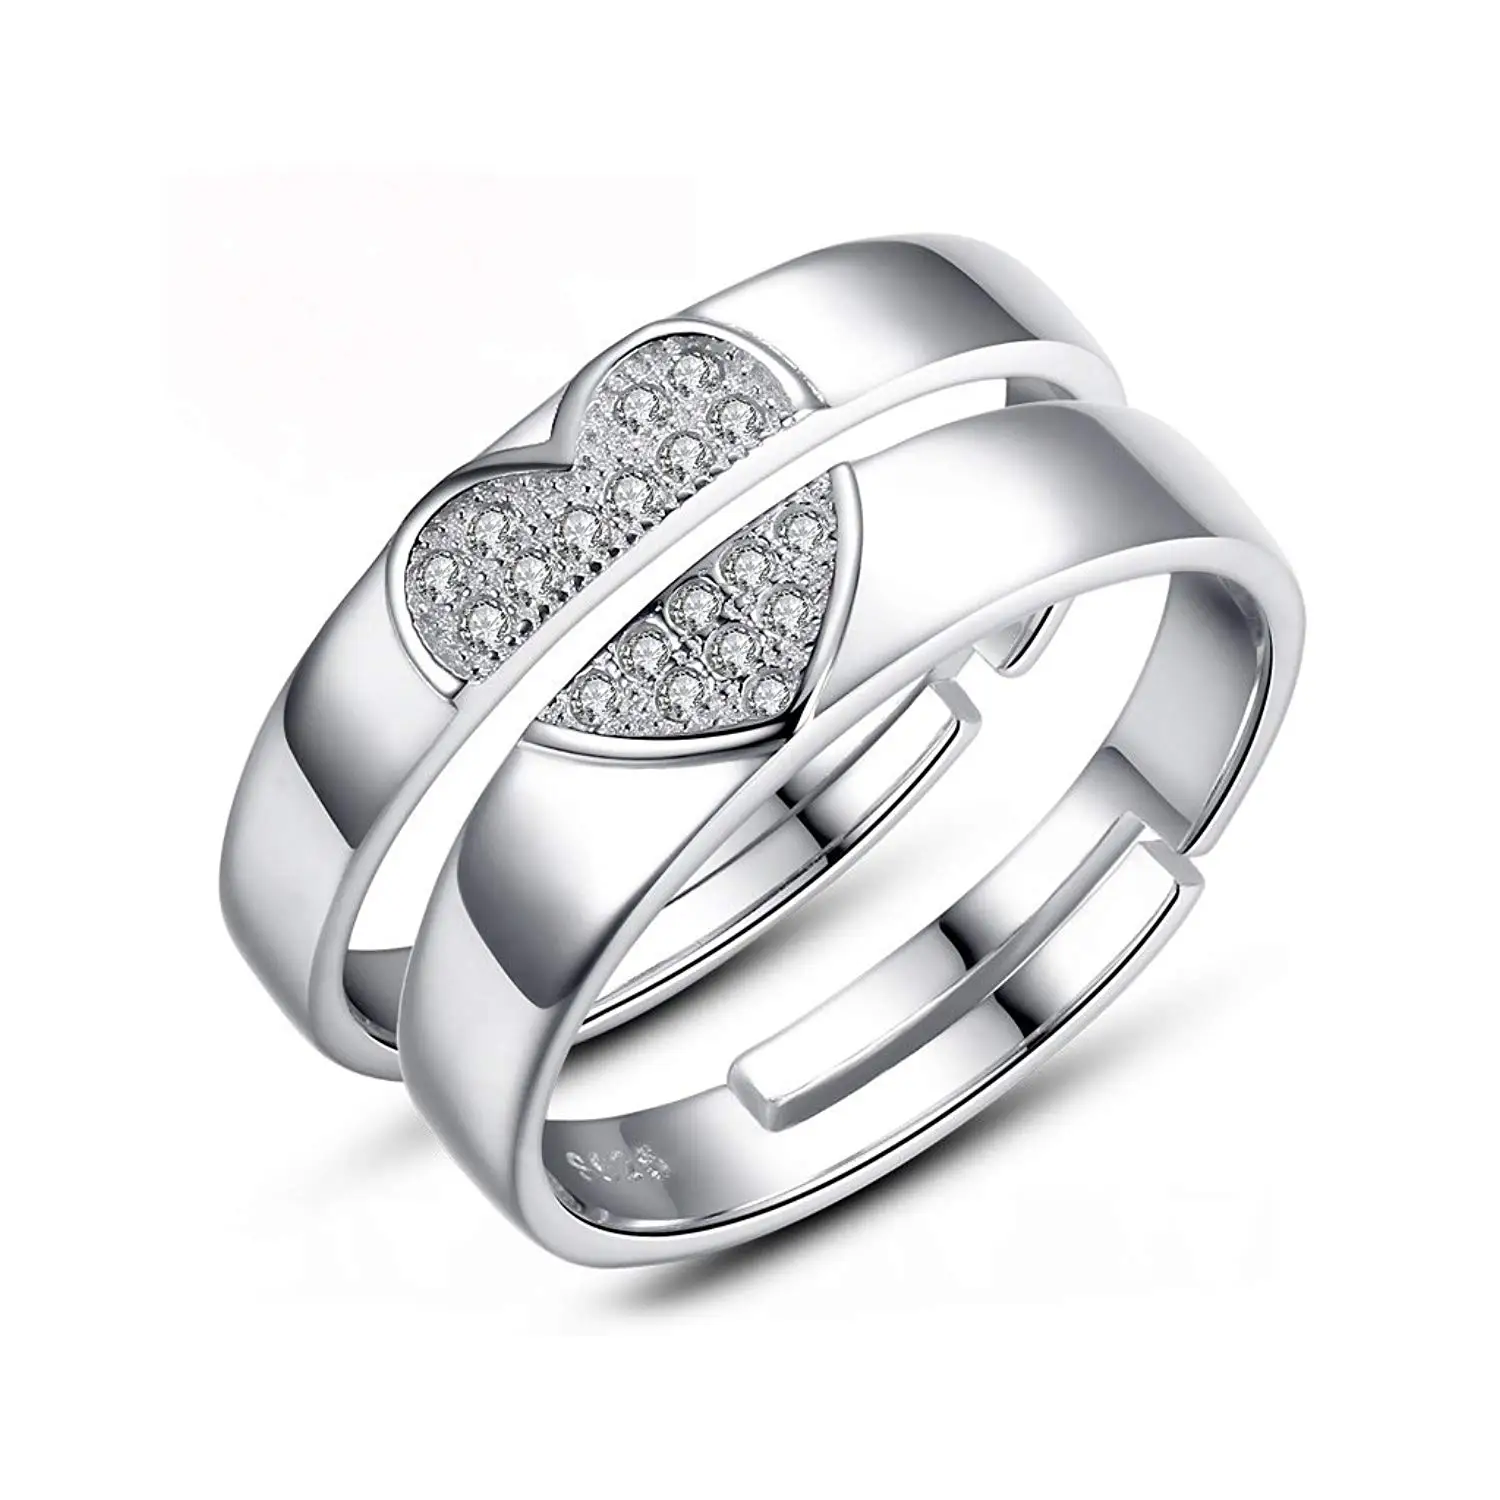 Cheap Sterling Silver Promise Rings For Couples, find ...